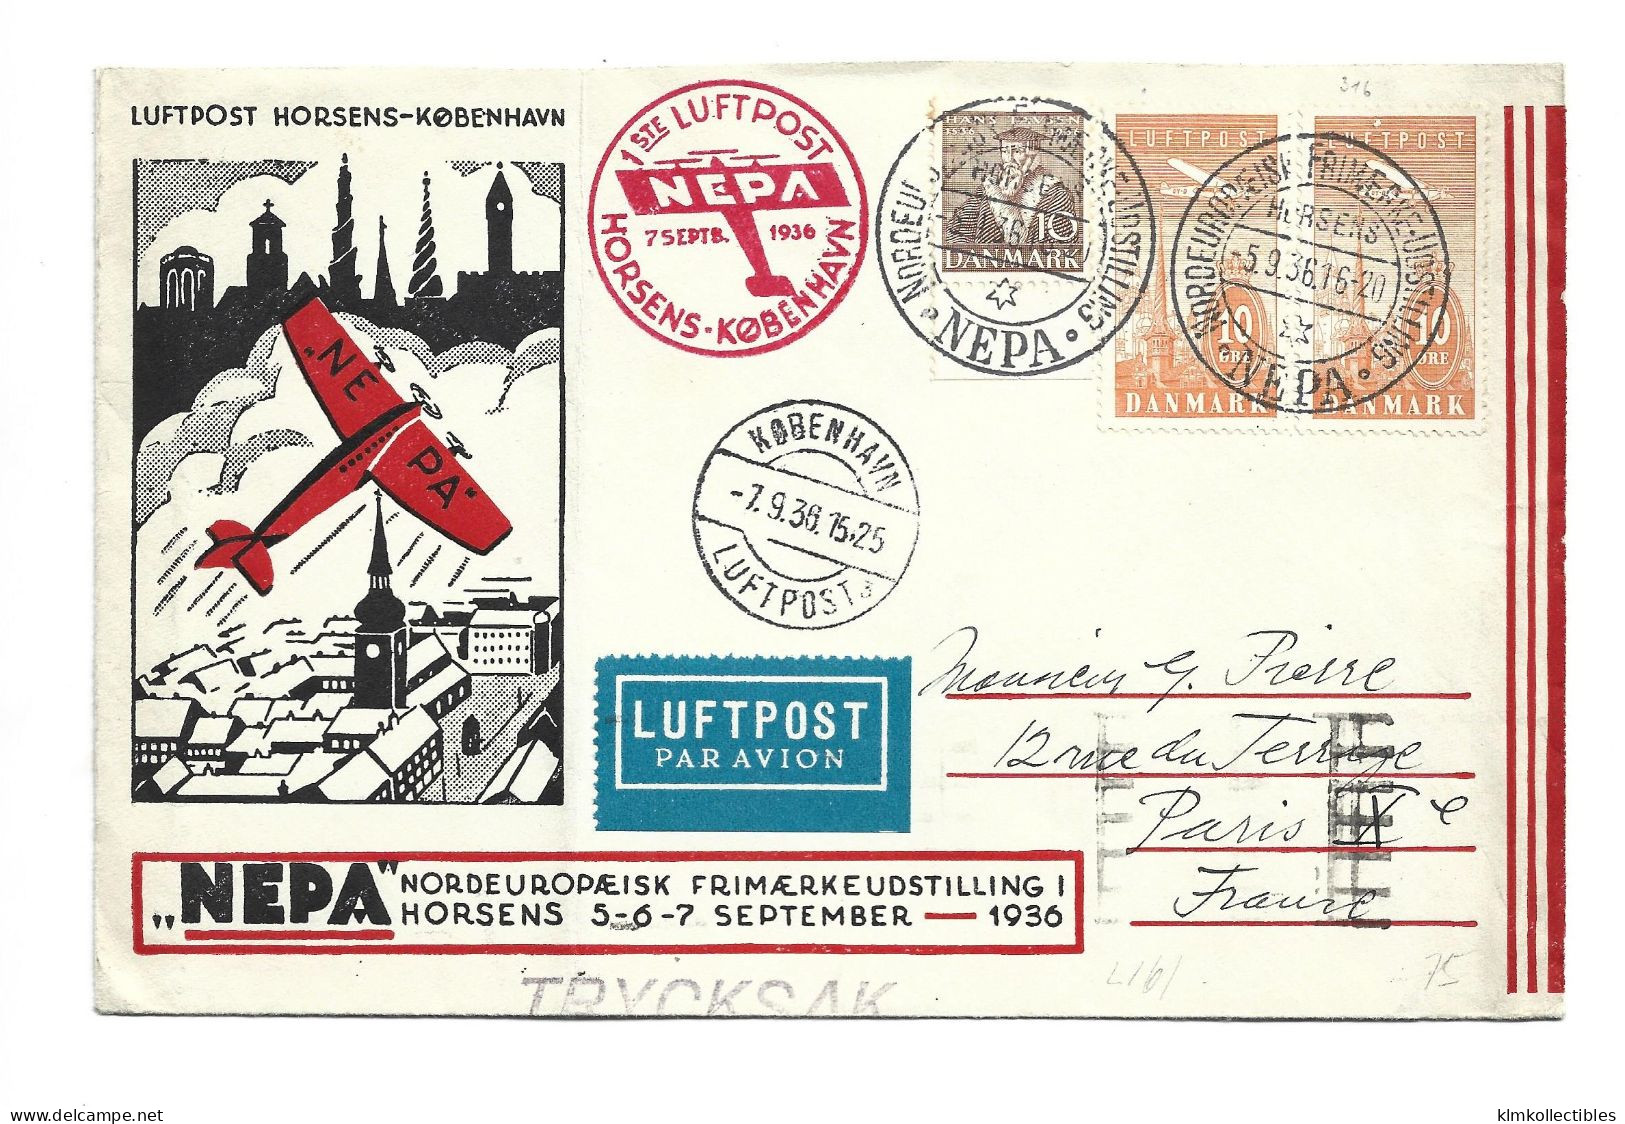 DENMARK DANMARK - AIRMAIL LUFTPOST COVER TO FRANCE - 1936 NEPA SPECIAL CANCEL FIRST 1ST FLIGHT - Airmail